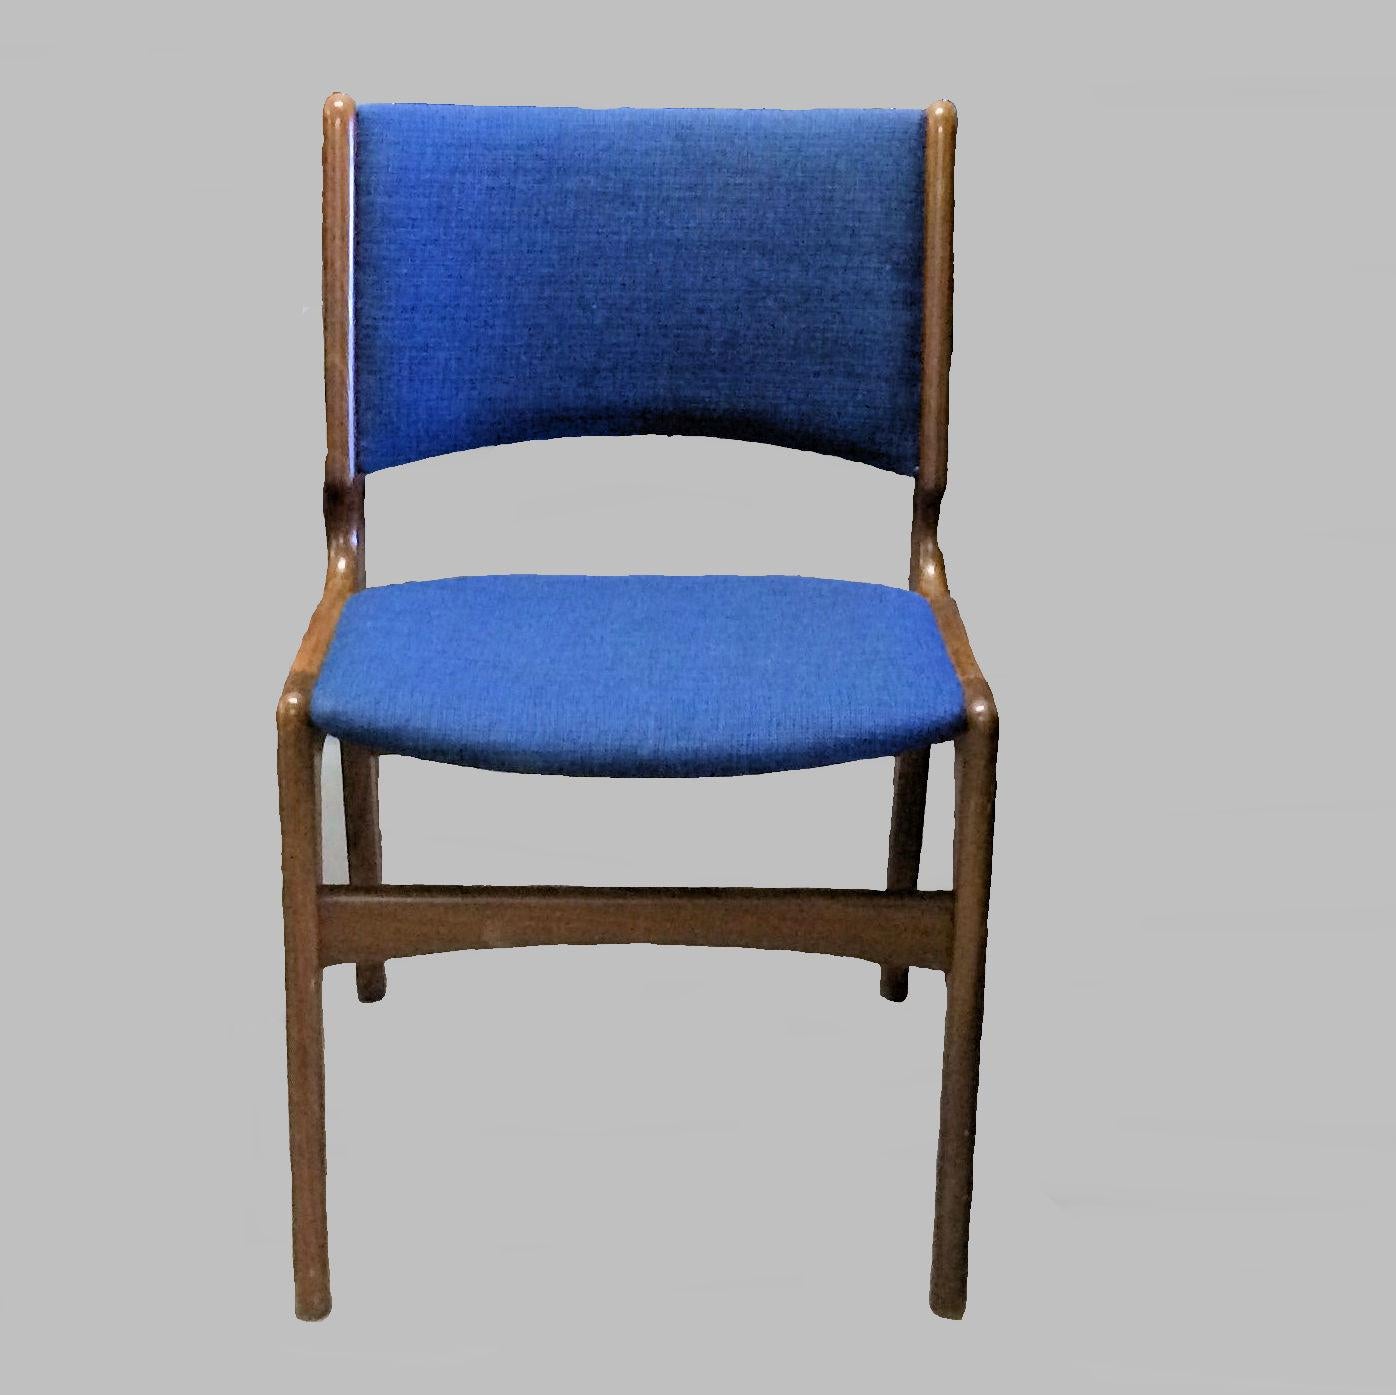 Set of ten refinished Erik Buch dining chairs made by Oddense Maskinsnedkeri.

The chairs feature a solid teak frame and are as all of Erik Buchs chairs characterized by high-quality materials, solid craftsmanship, Scandinavian aesthetic and not